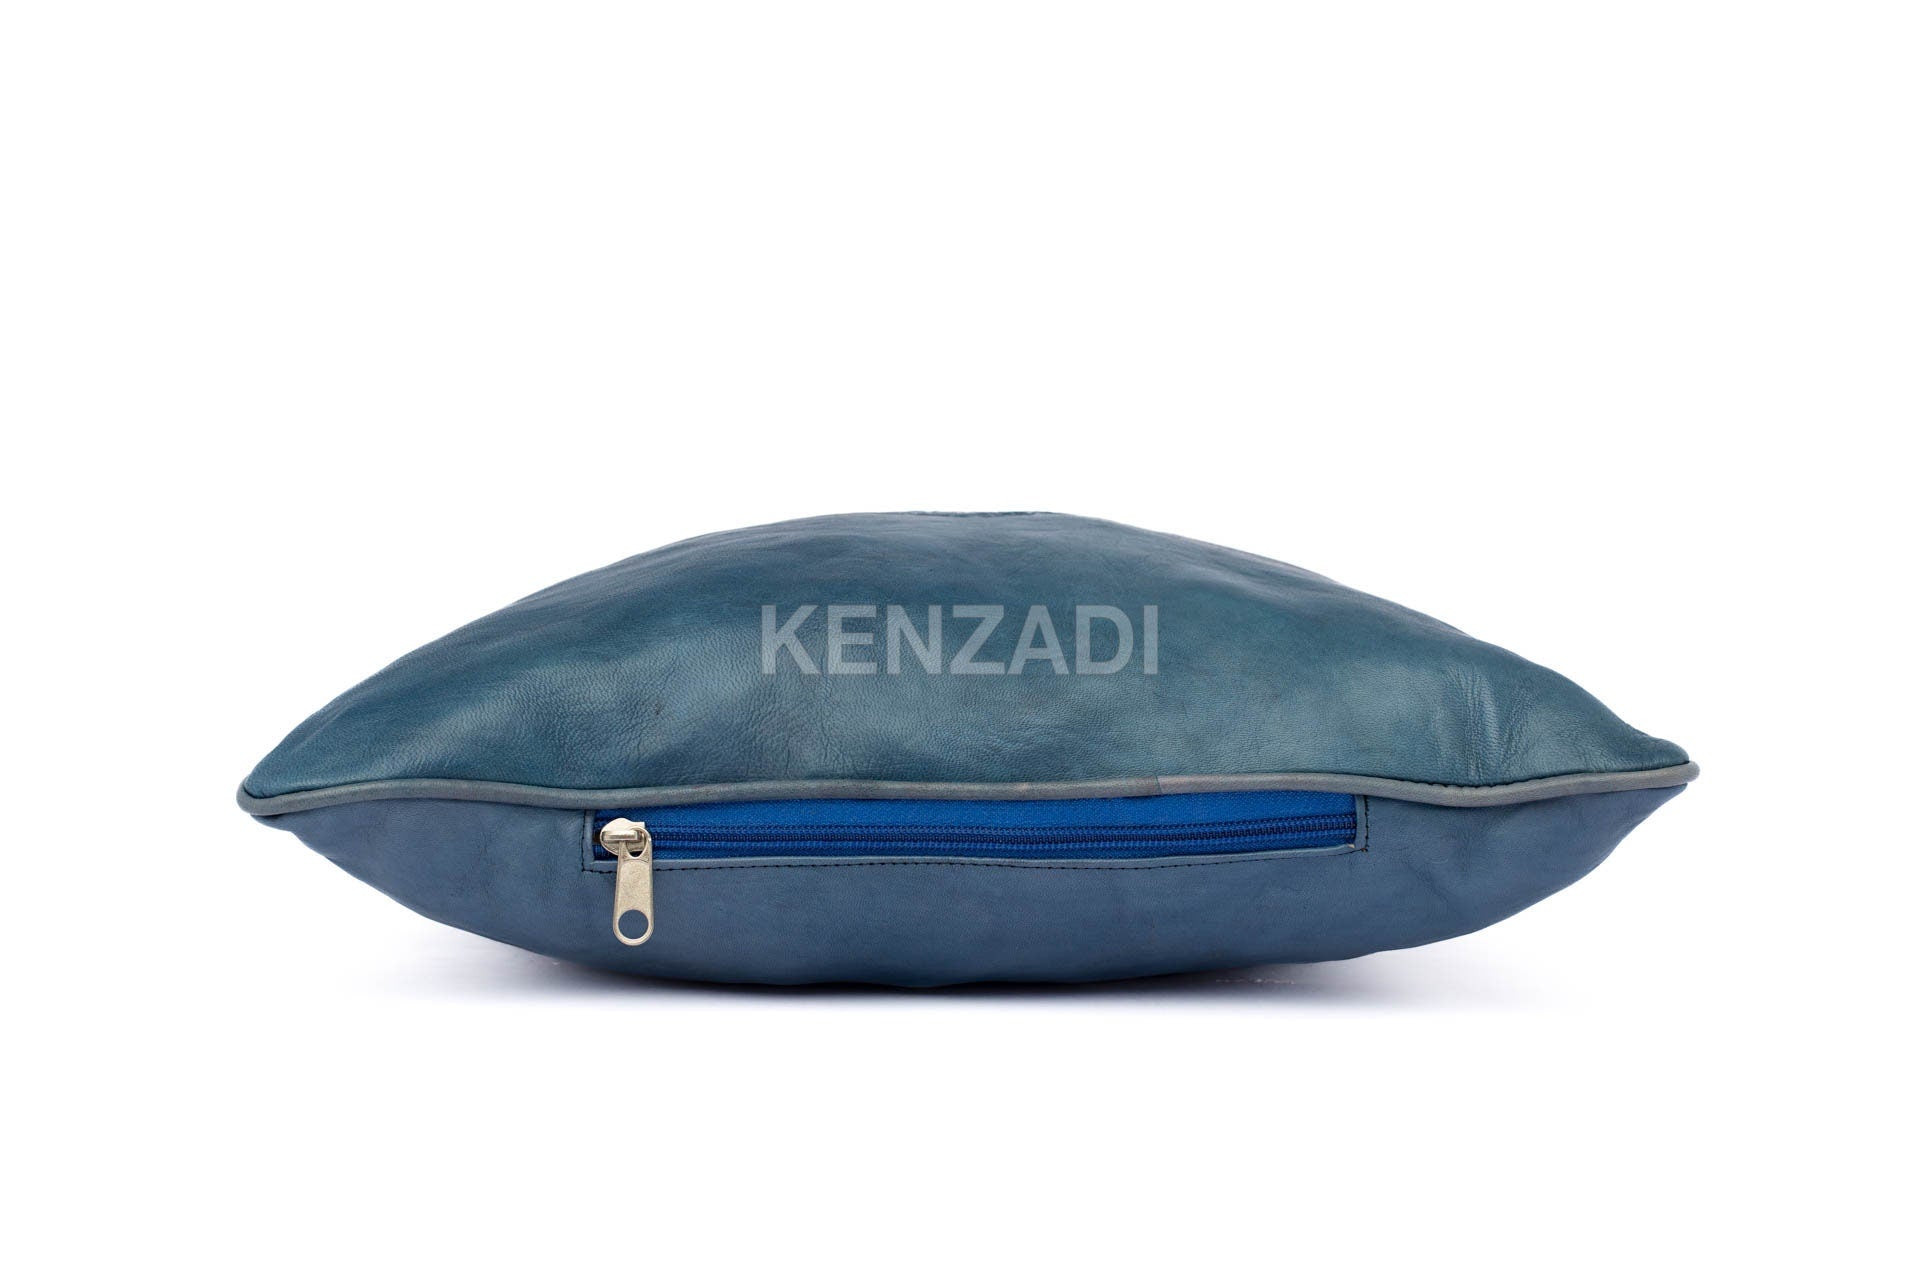 Moroccan Leather Pillow, Blue Jeans traditional Throw Pillow Case by Kenzadi - Handmade by My Poufs